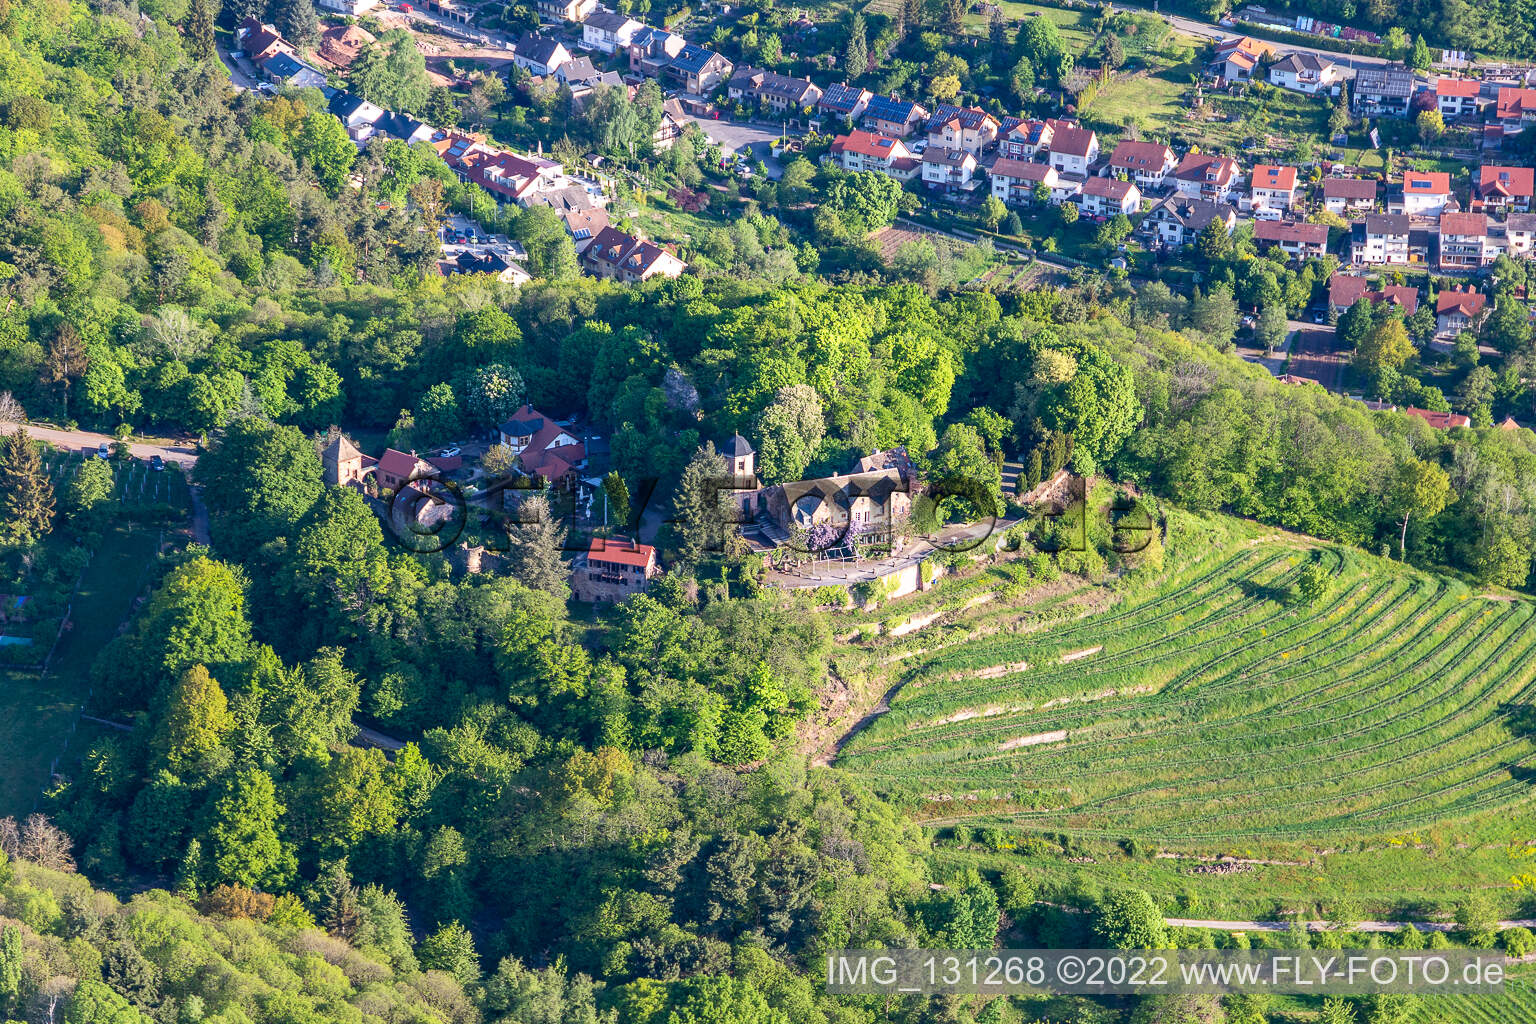 Kropsburg Castle in Sankt Martin in the state Rhineland-Palatinate, Germany from above